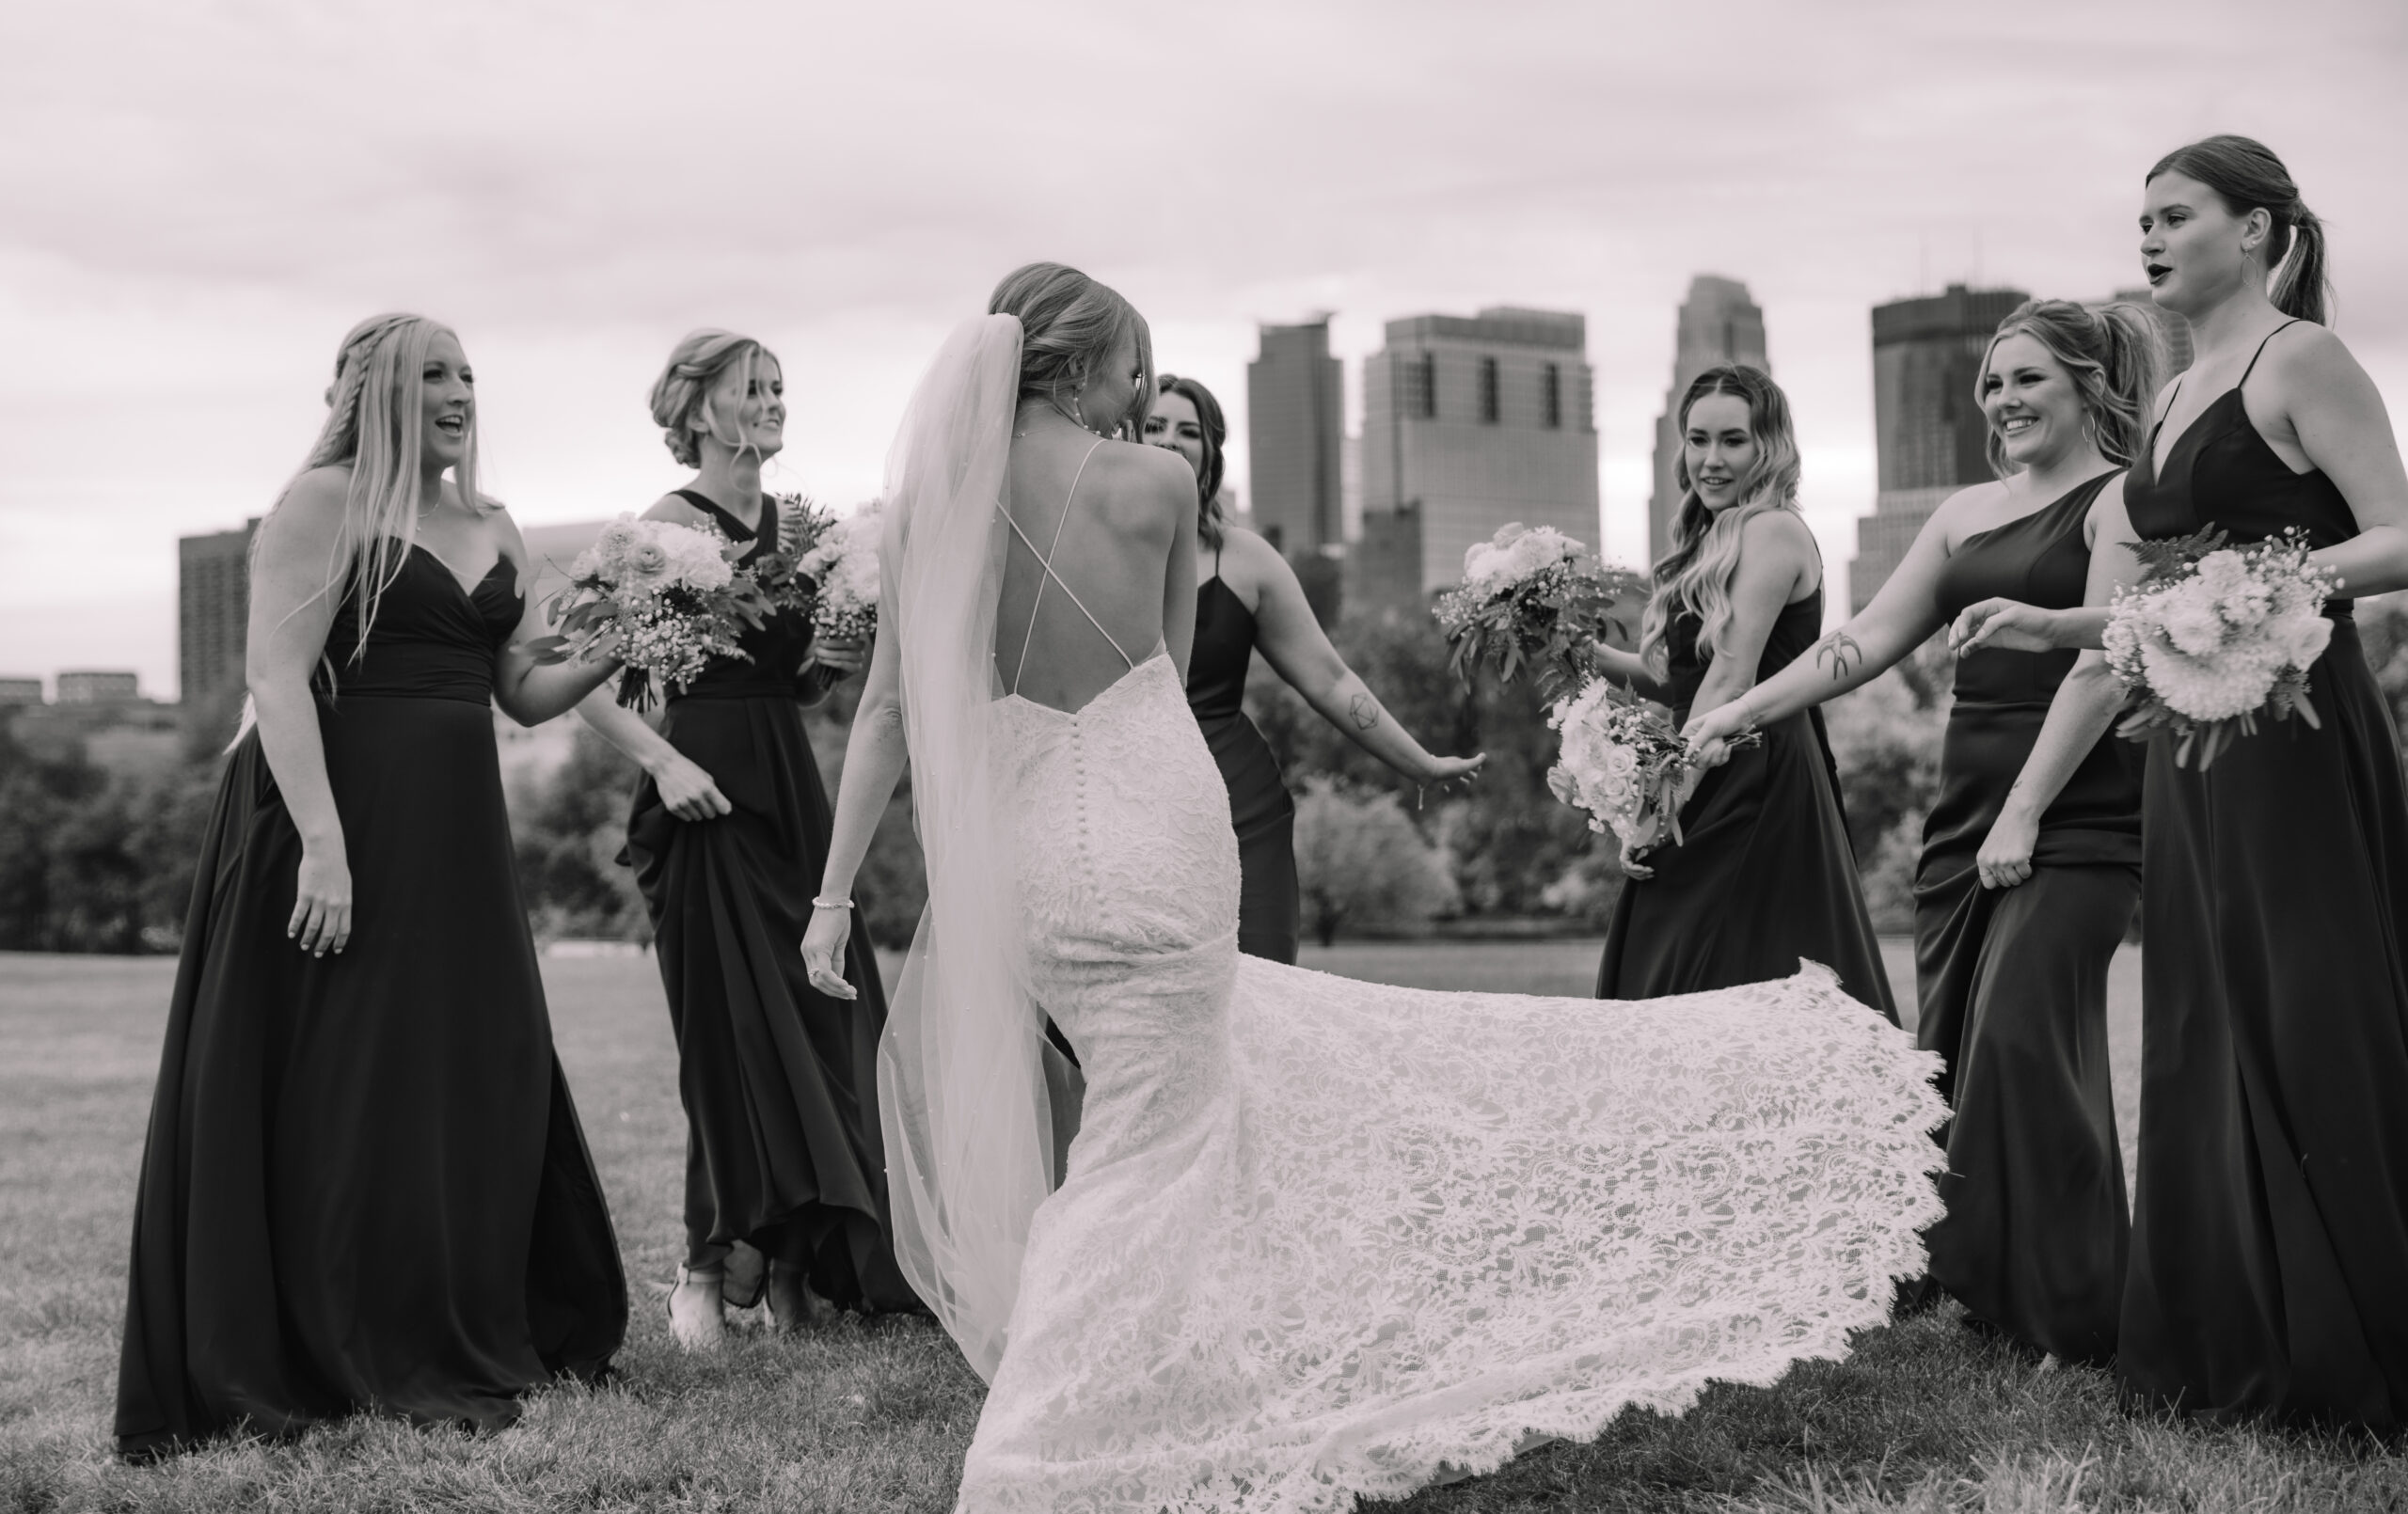 Stunning bride with an open back wedding dress dancing with her bridesmaids in front of the Minneapolis skyline at Boom island park